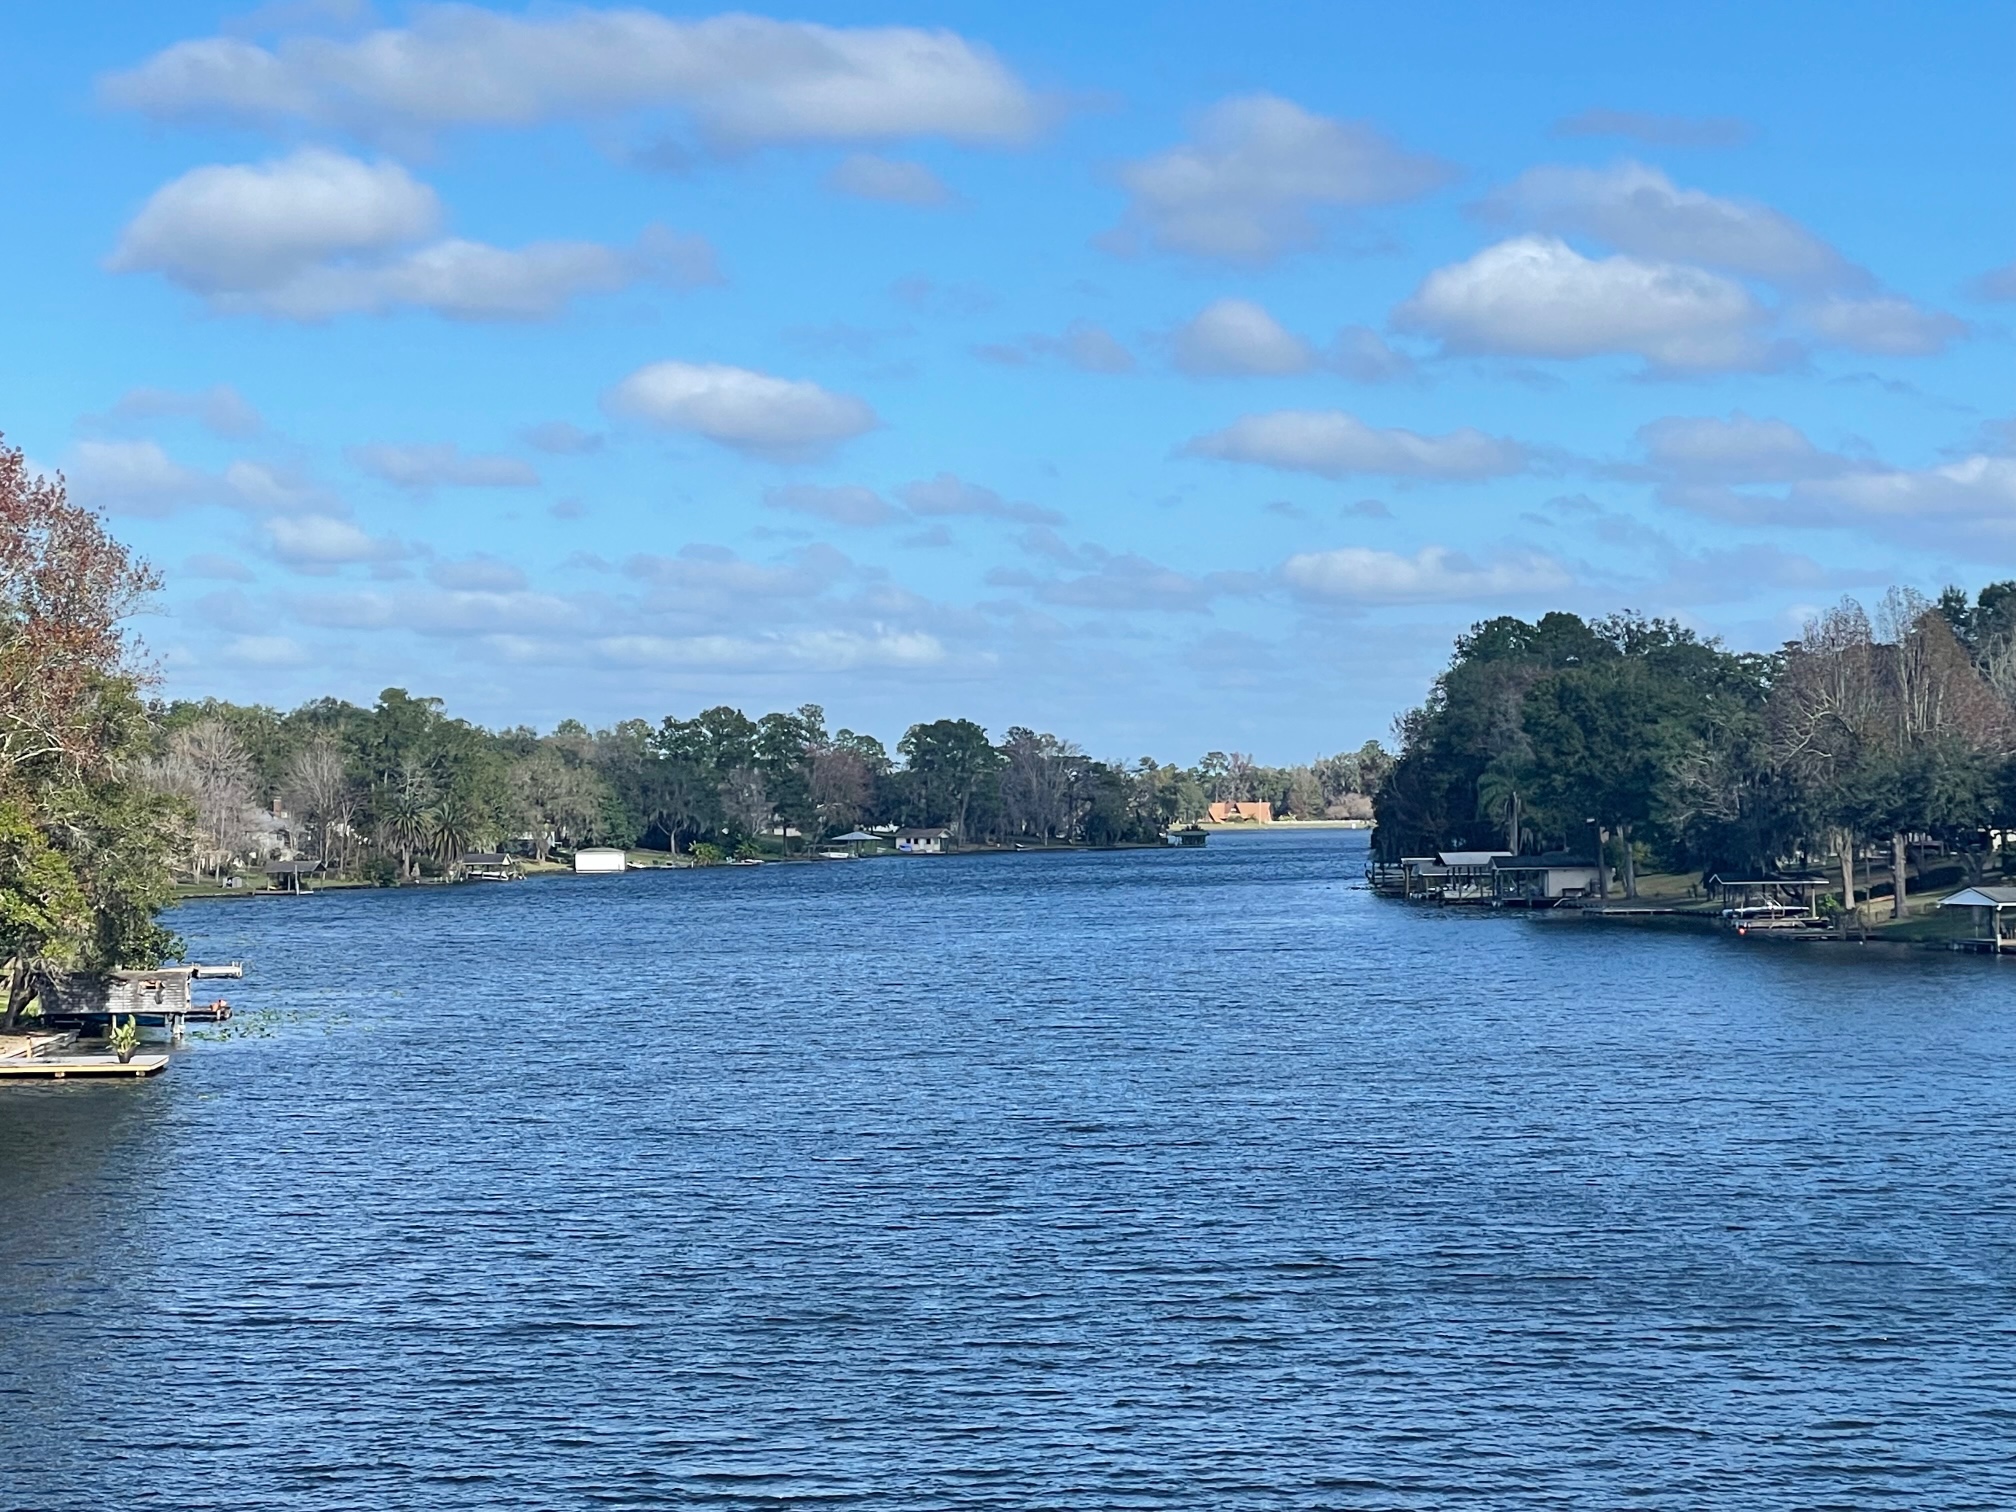 Looking for Lake Asbury Homes for Sale?